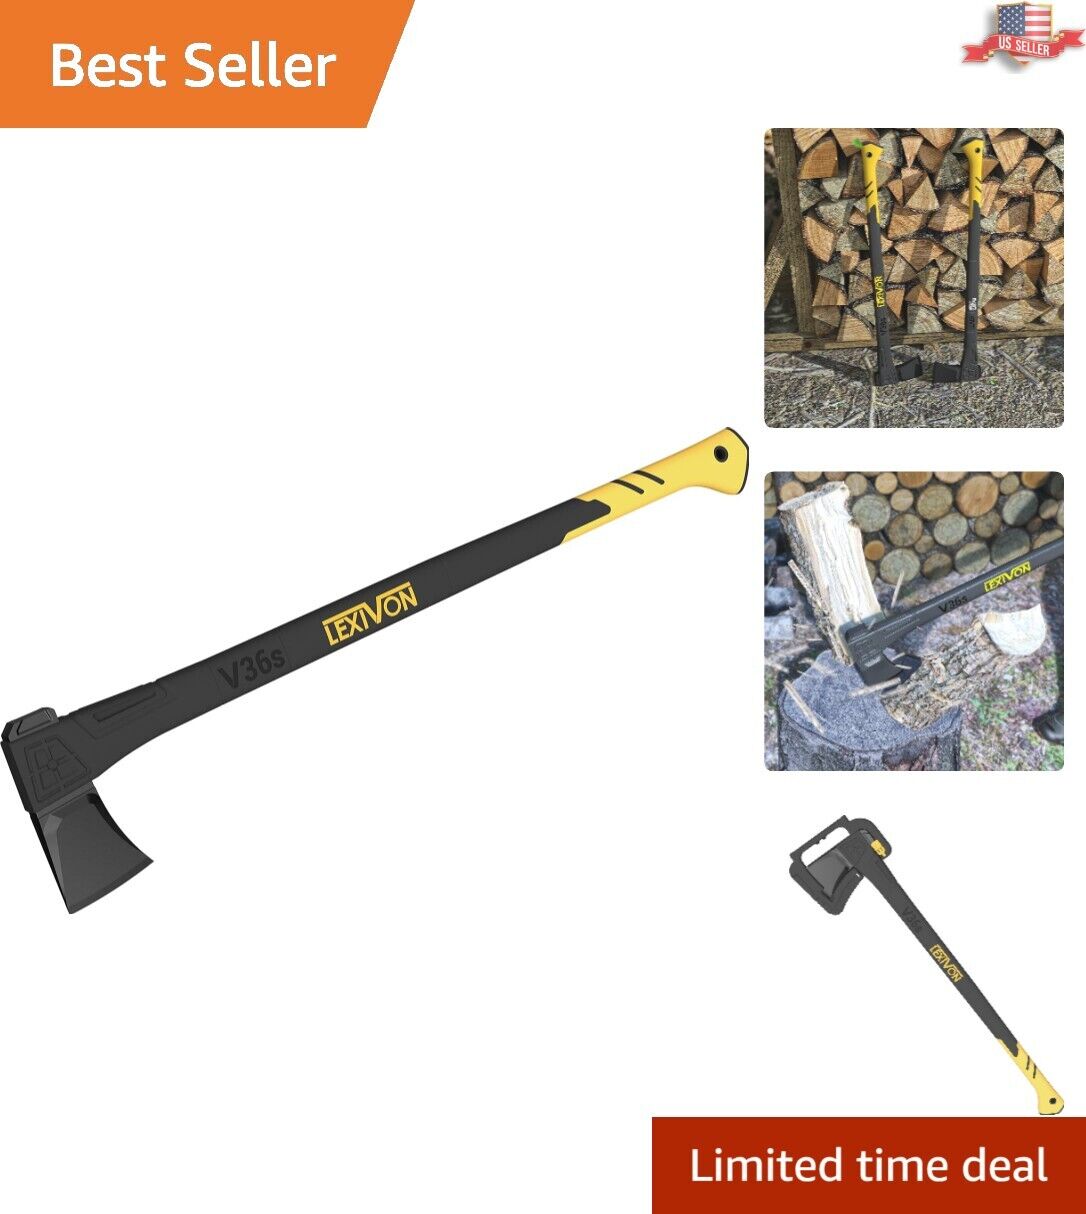 Durable Splitting Axe with Forged Carbon Steel Blade for Effortless Splits